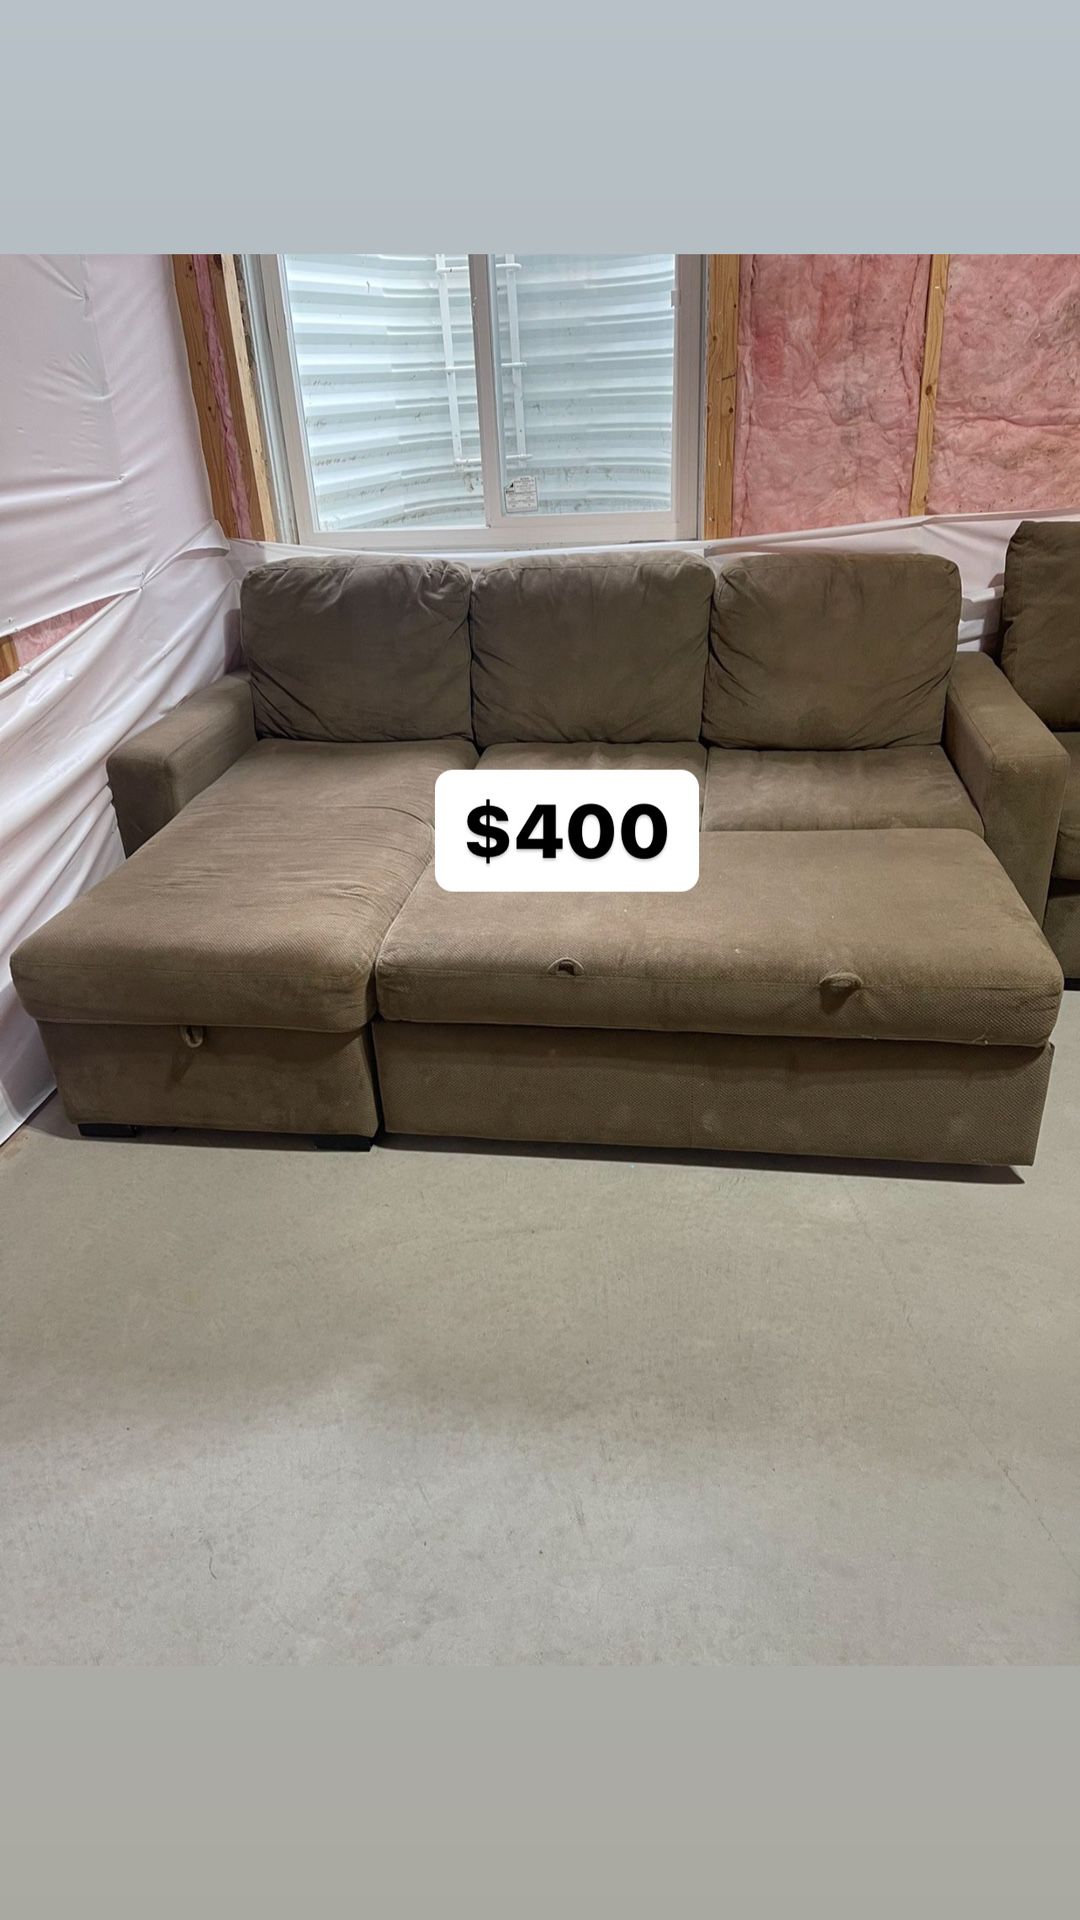 Delivery AVAILABLE Brown Sectional Sleeper With Chaise